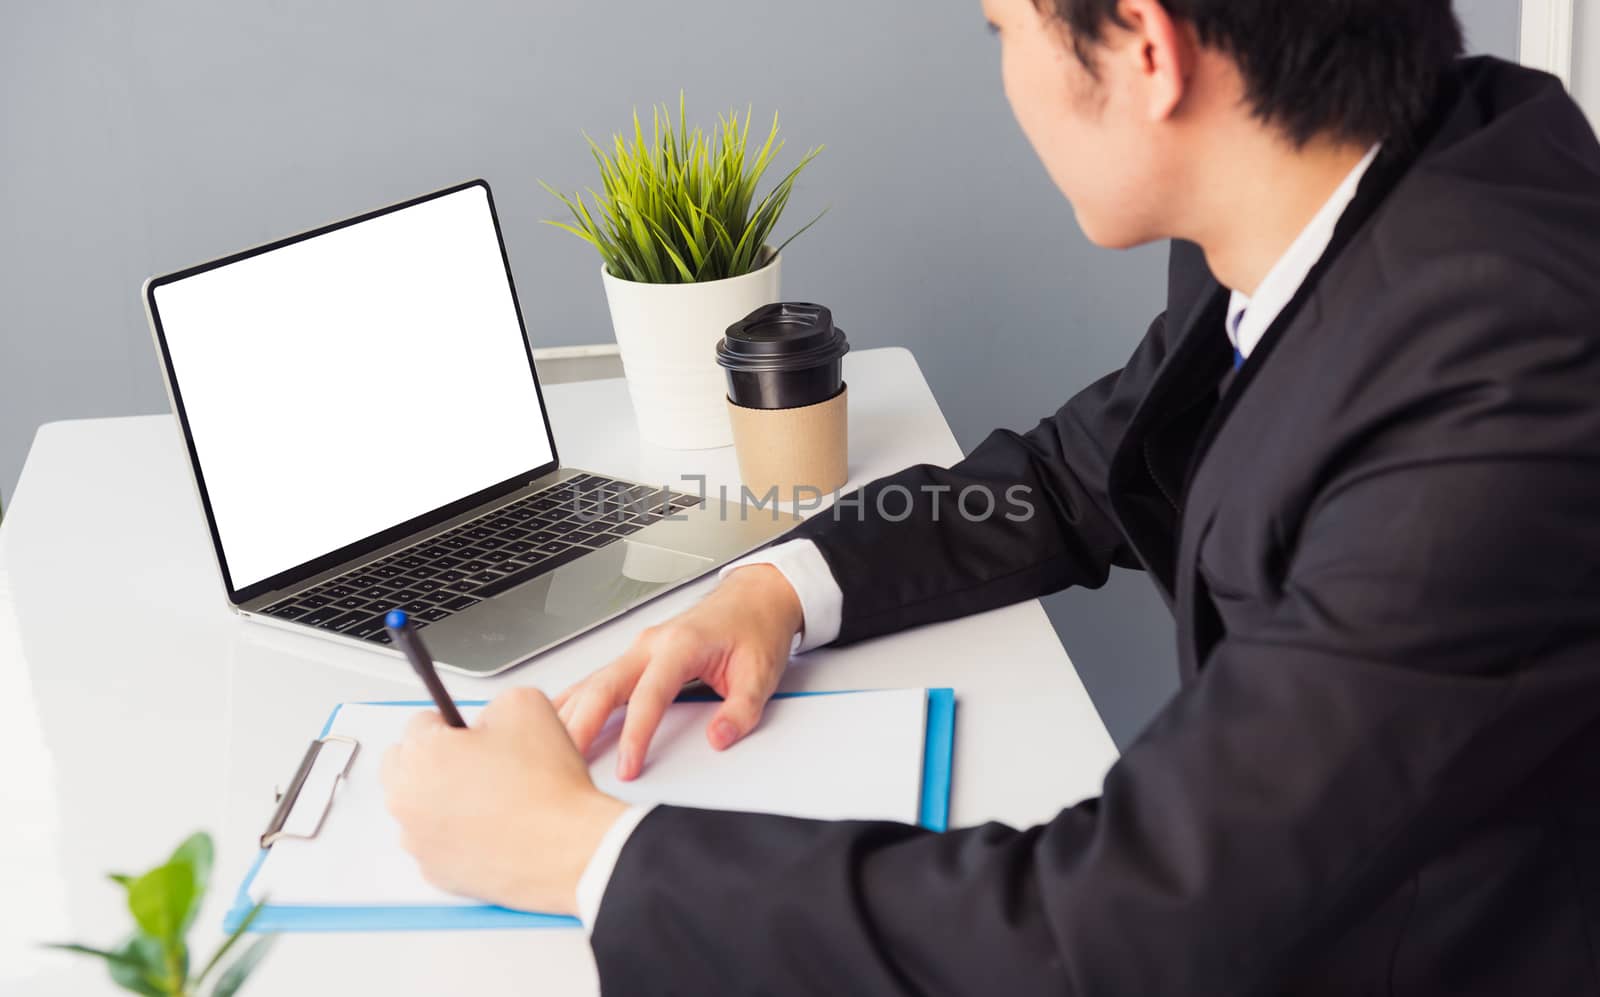 Businessman wearing suit video conference call laptop computer by Sorapop